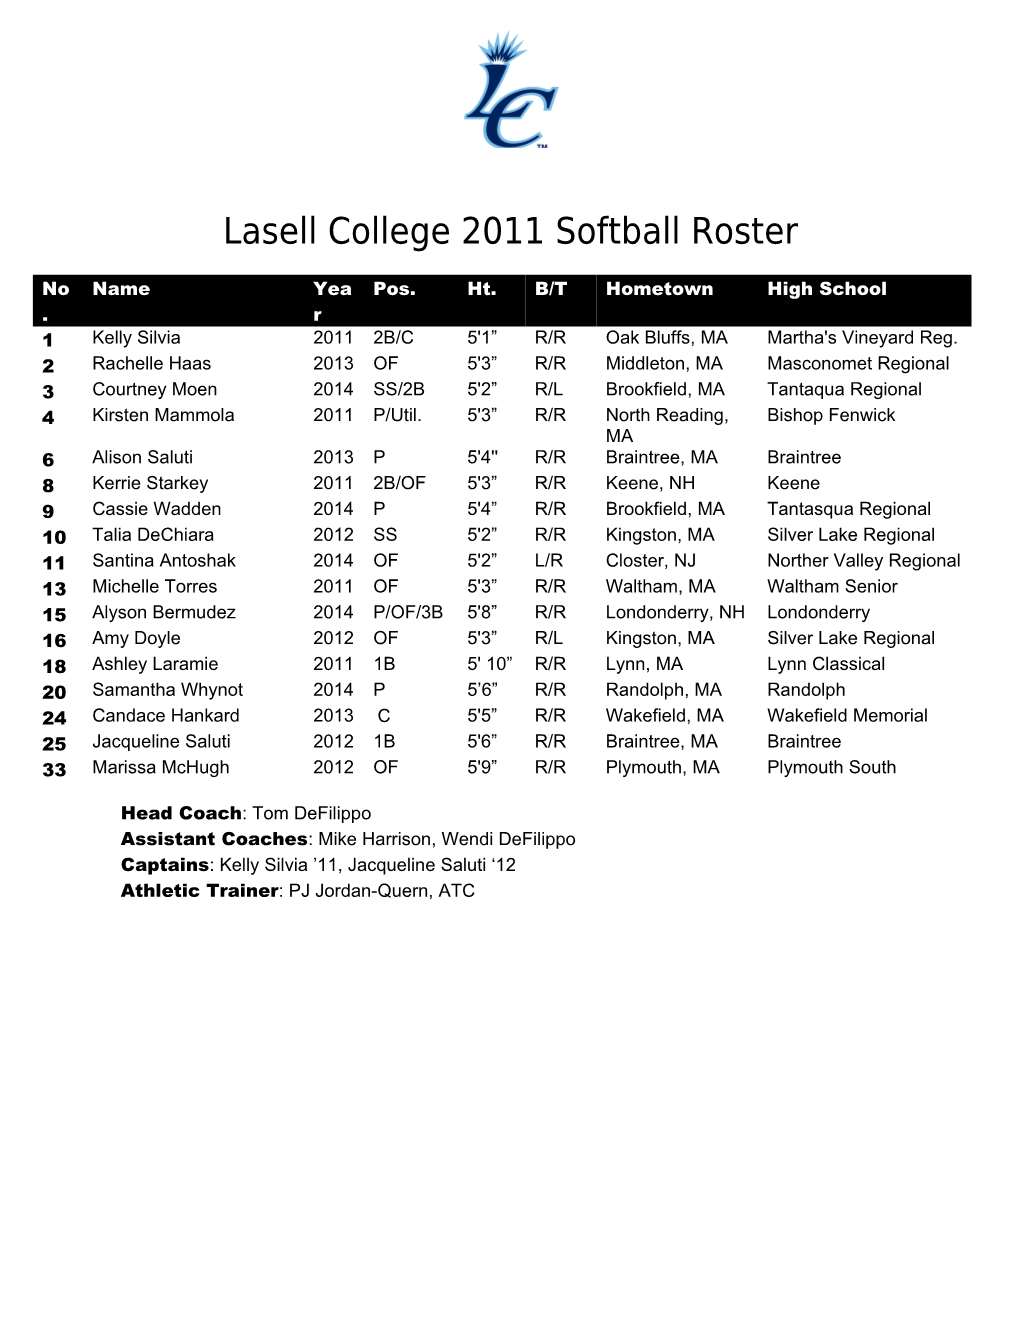 Lasell College 2011 Softball Roster